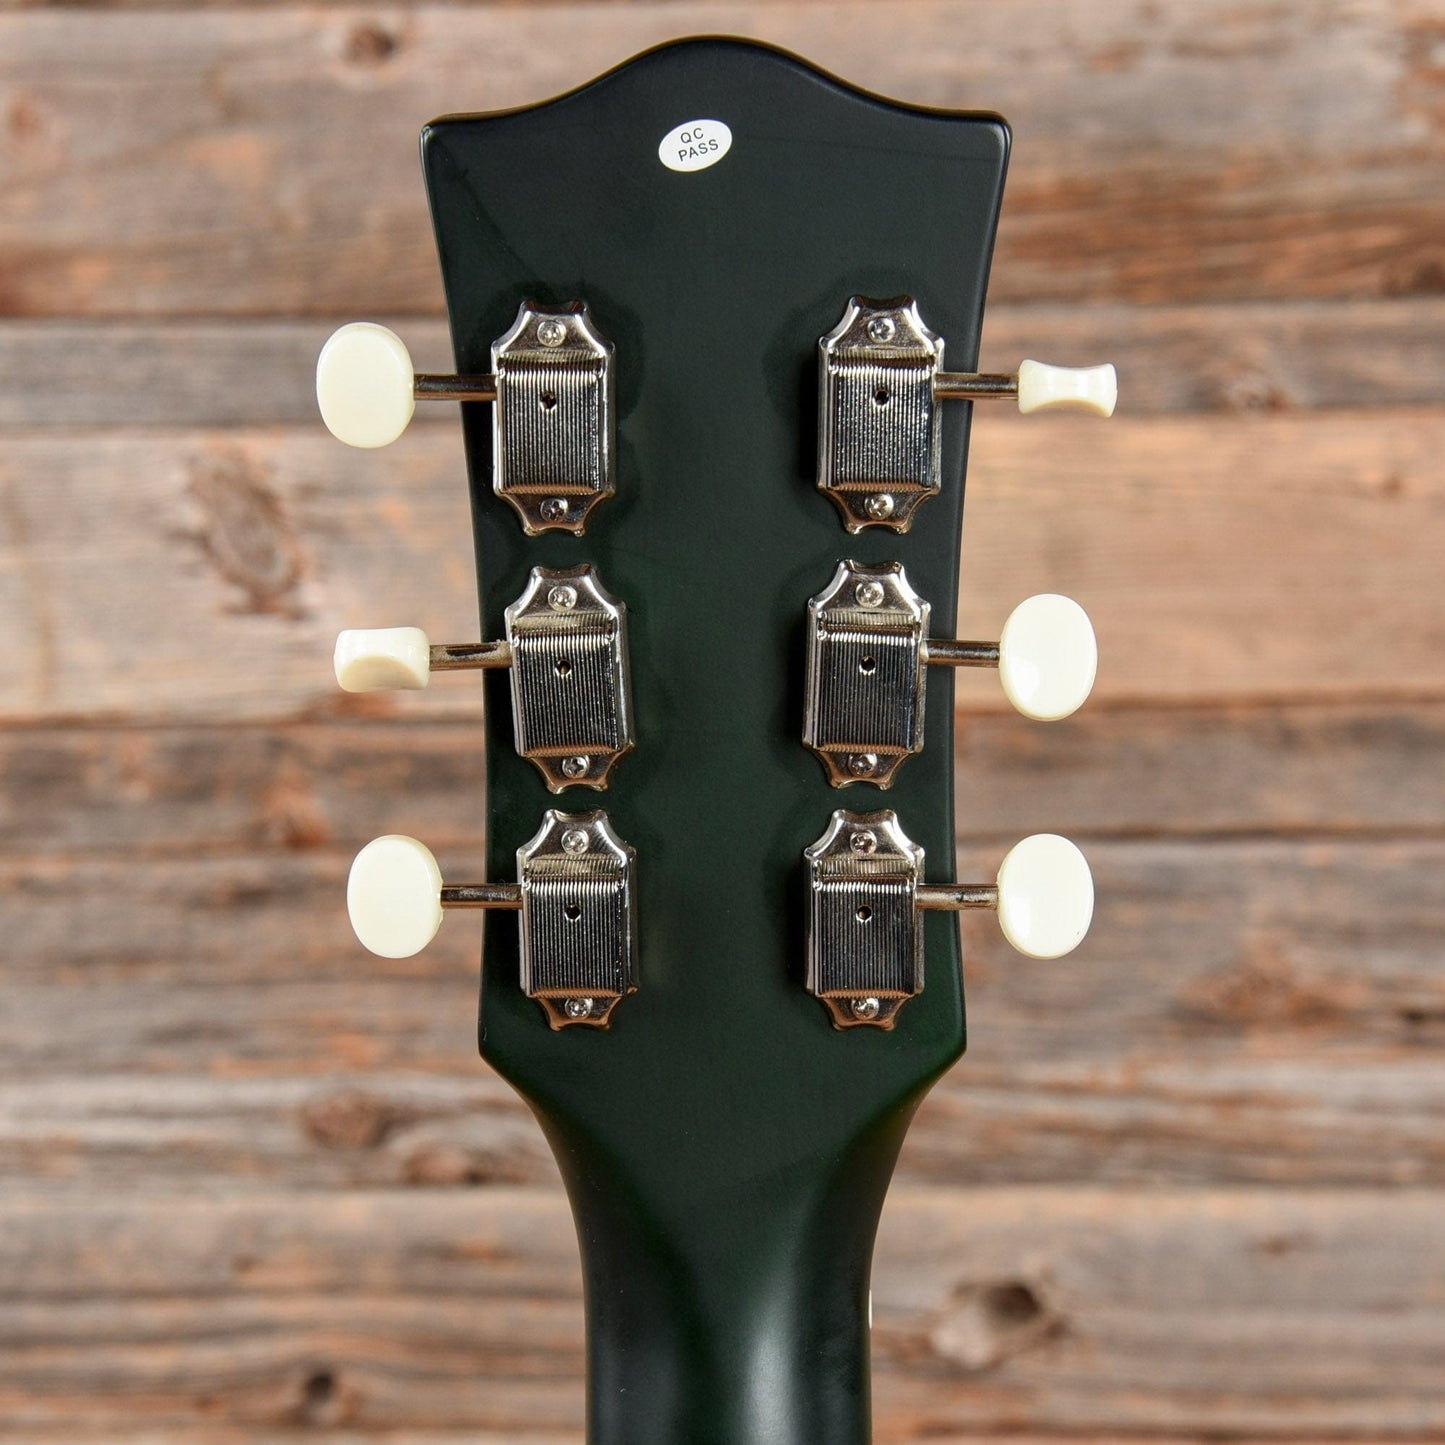 Quincy Doublecut Electric Green Electric Guitars / Solid Body